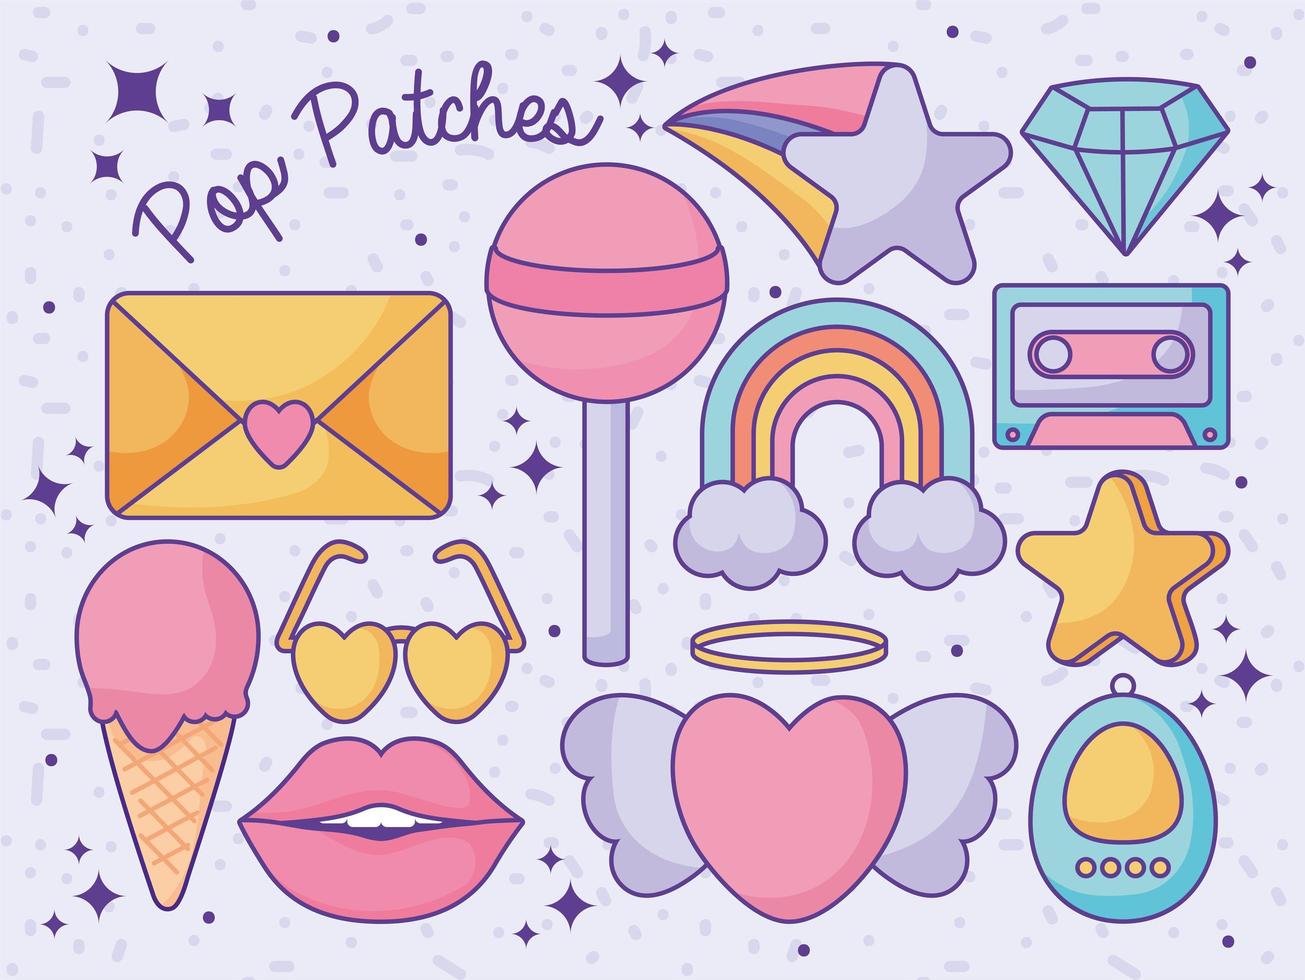 pop patches poster vector